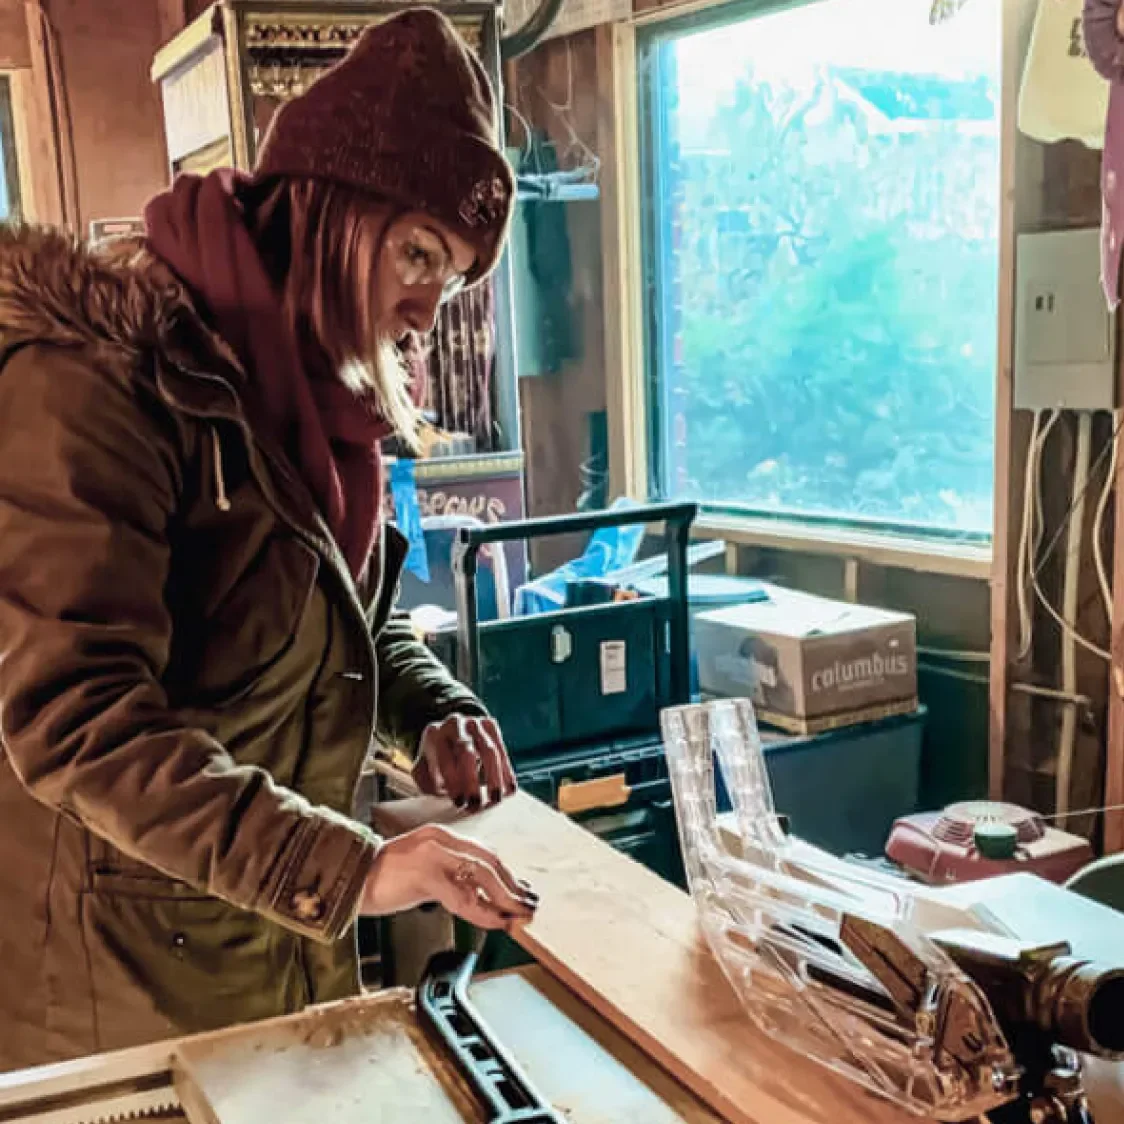 A woman cutting wood on a table saw